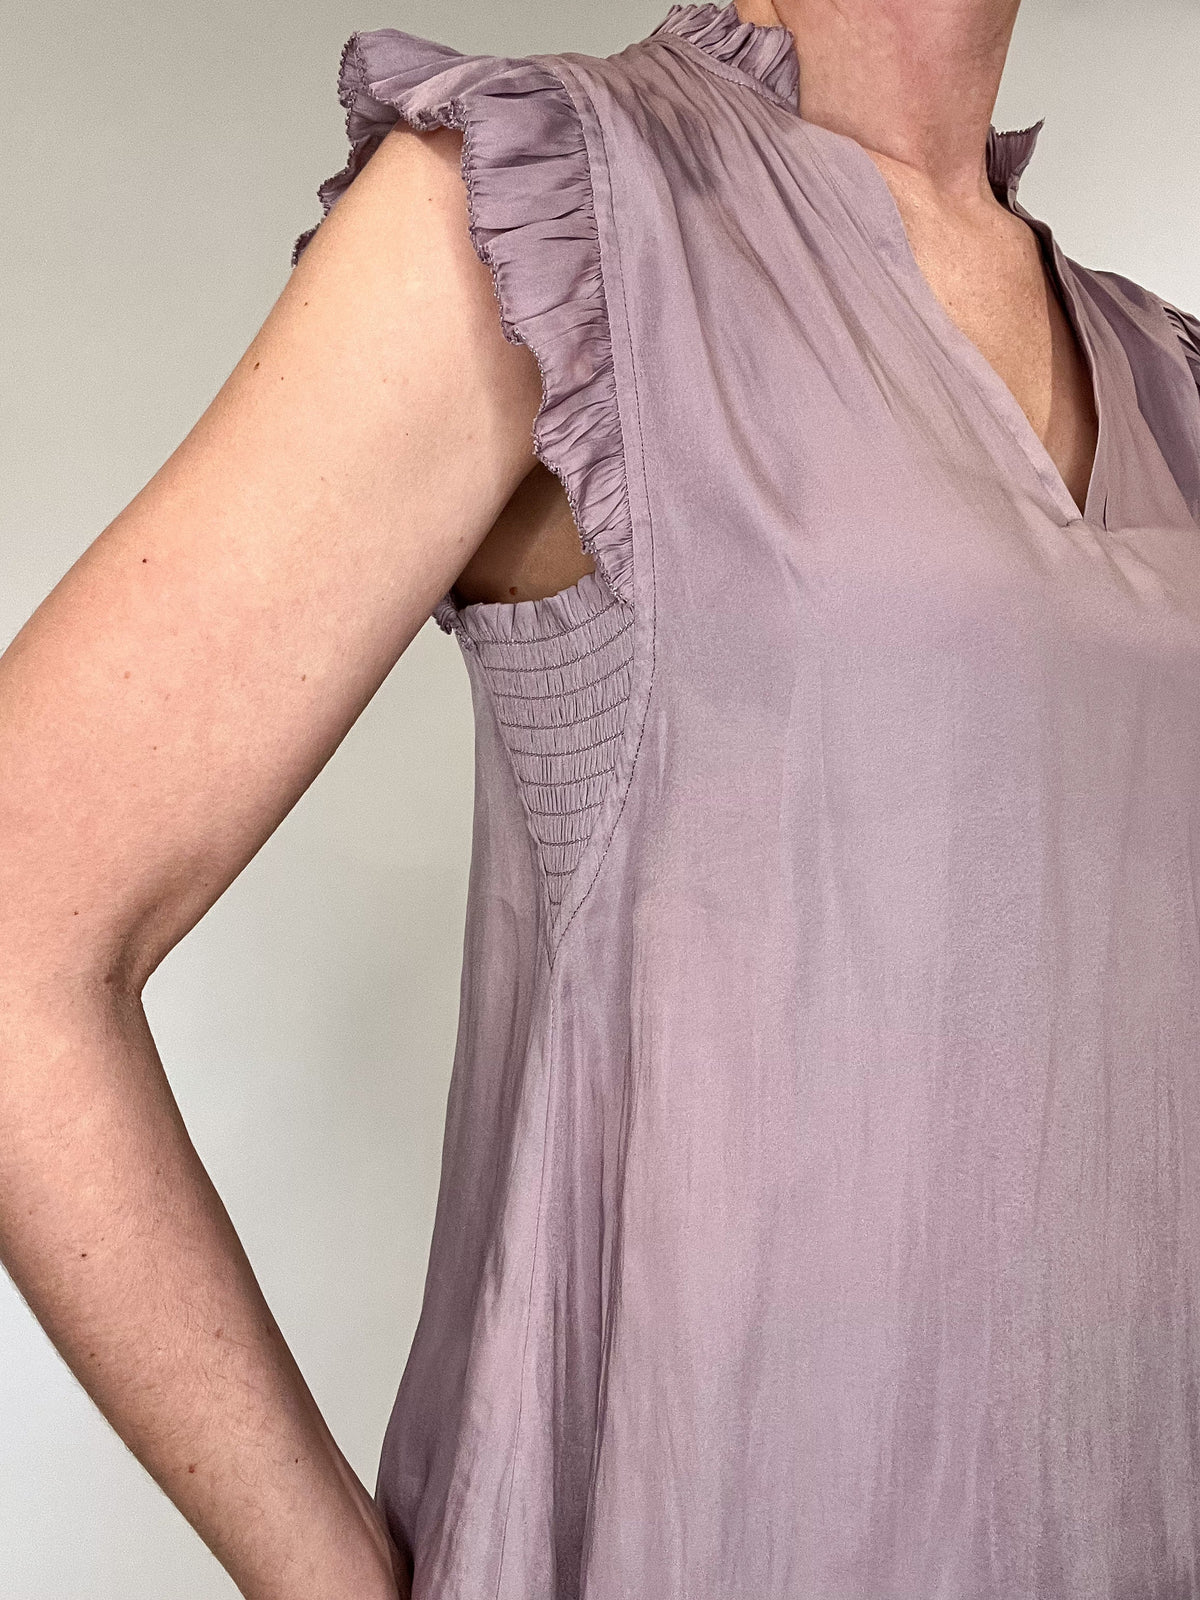 Indulge in luxurious style with our Satin Ruffle Sleeve Blouse. Crafted from lightweight satin fabric, it comes in two soft and feminine colors - lavender and peach. The v-neck and ruffled shoulders add a touch of sophistication to this sleeveless blouse. Elevate your wardrobe with this exclusive piece.